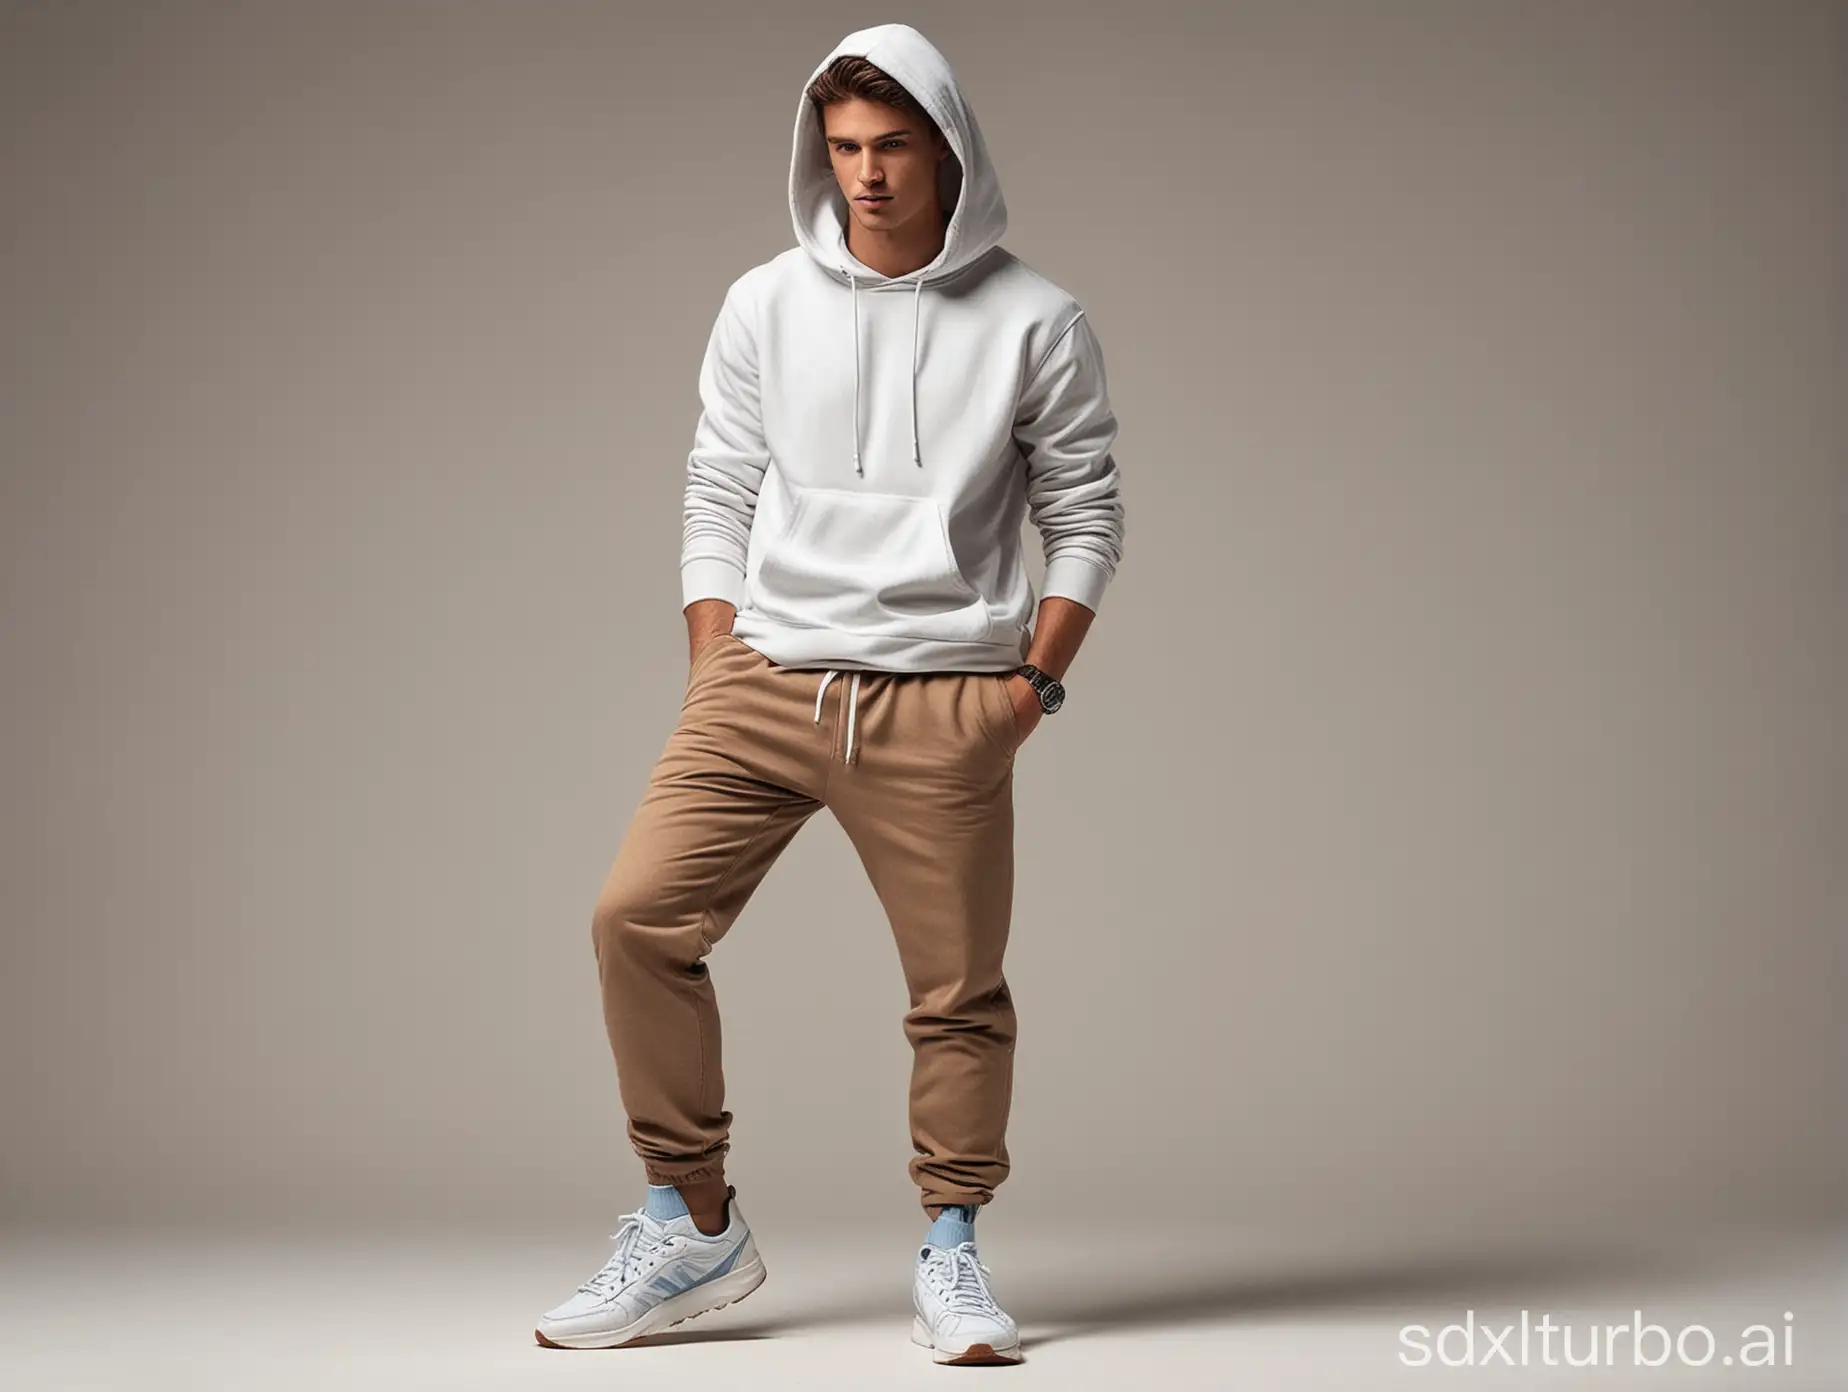 Fashionable-Male-Model-in-White-Hoodie-and-Blue-Sneakers-Standing-Pose